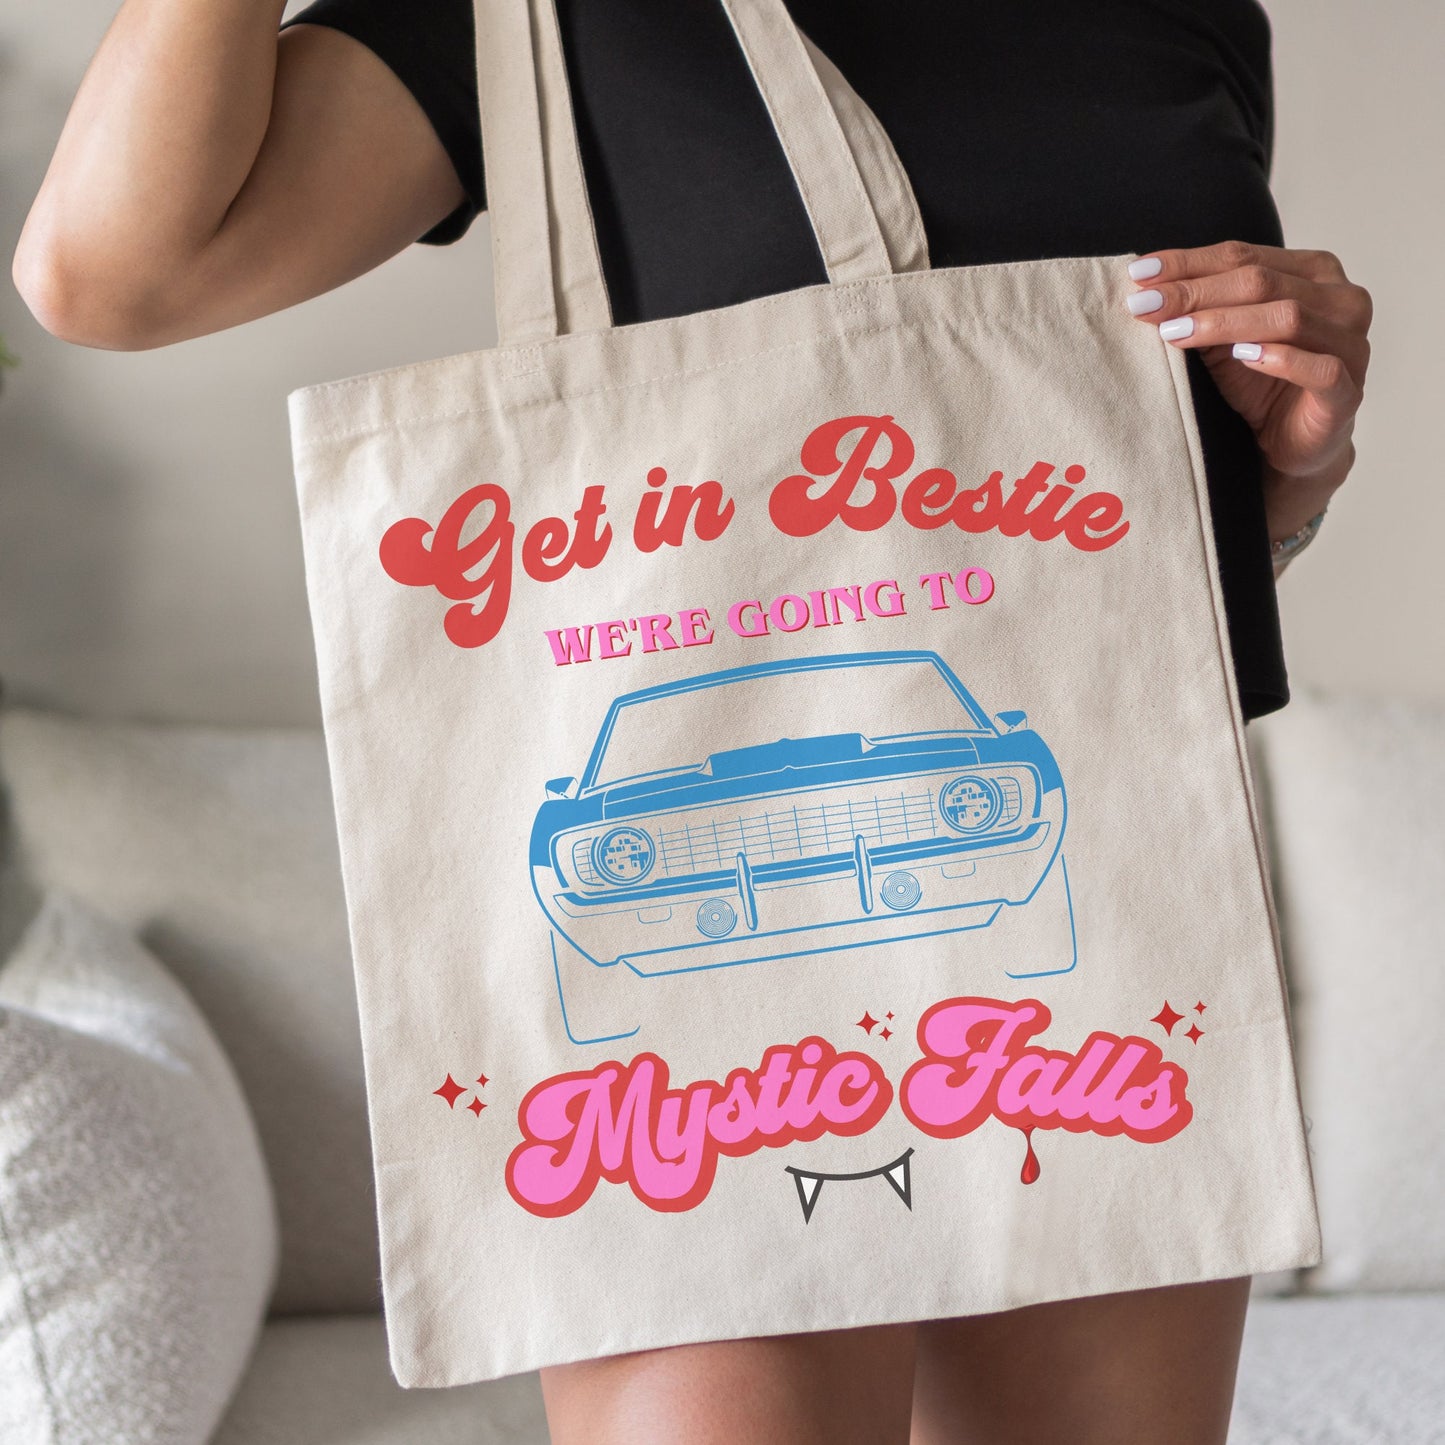 Mystic Falls tote bag, TVD tote bag, Tvd merch, Tvd fan gift, Mystic Falls, Salvatore brothers, Tvd grocery bag, I was feeling Epic, Tvd fan